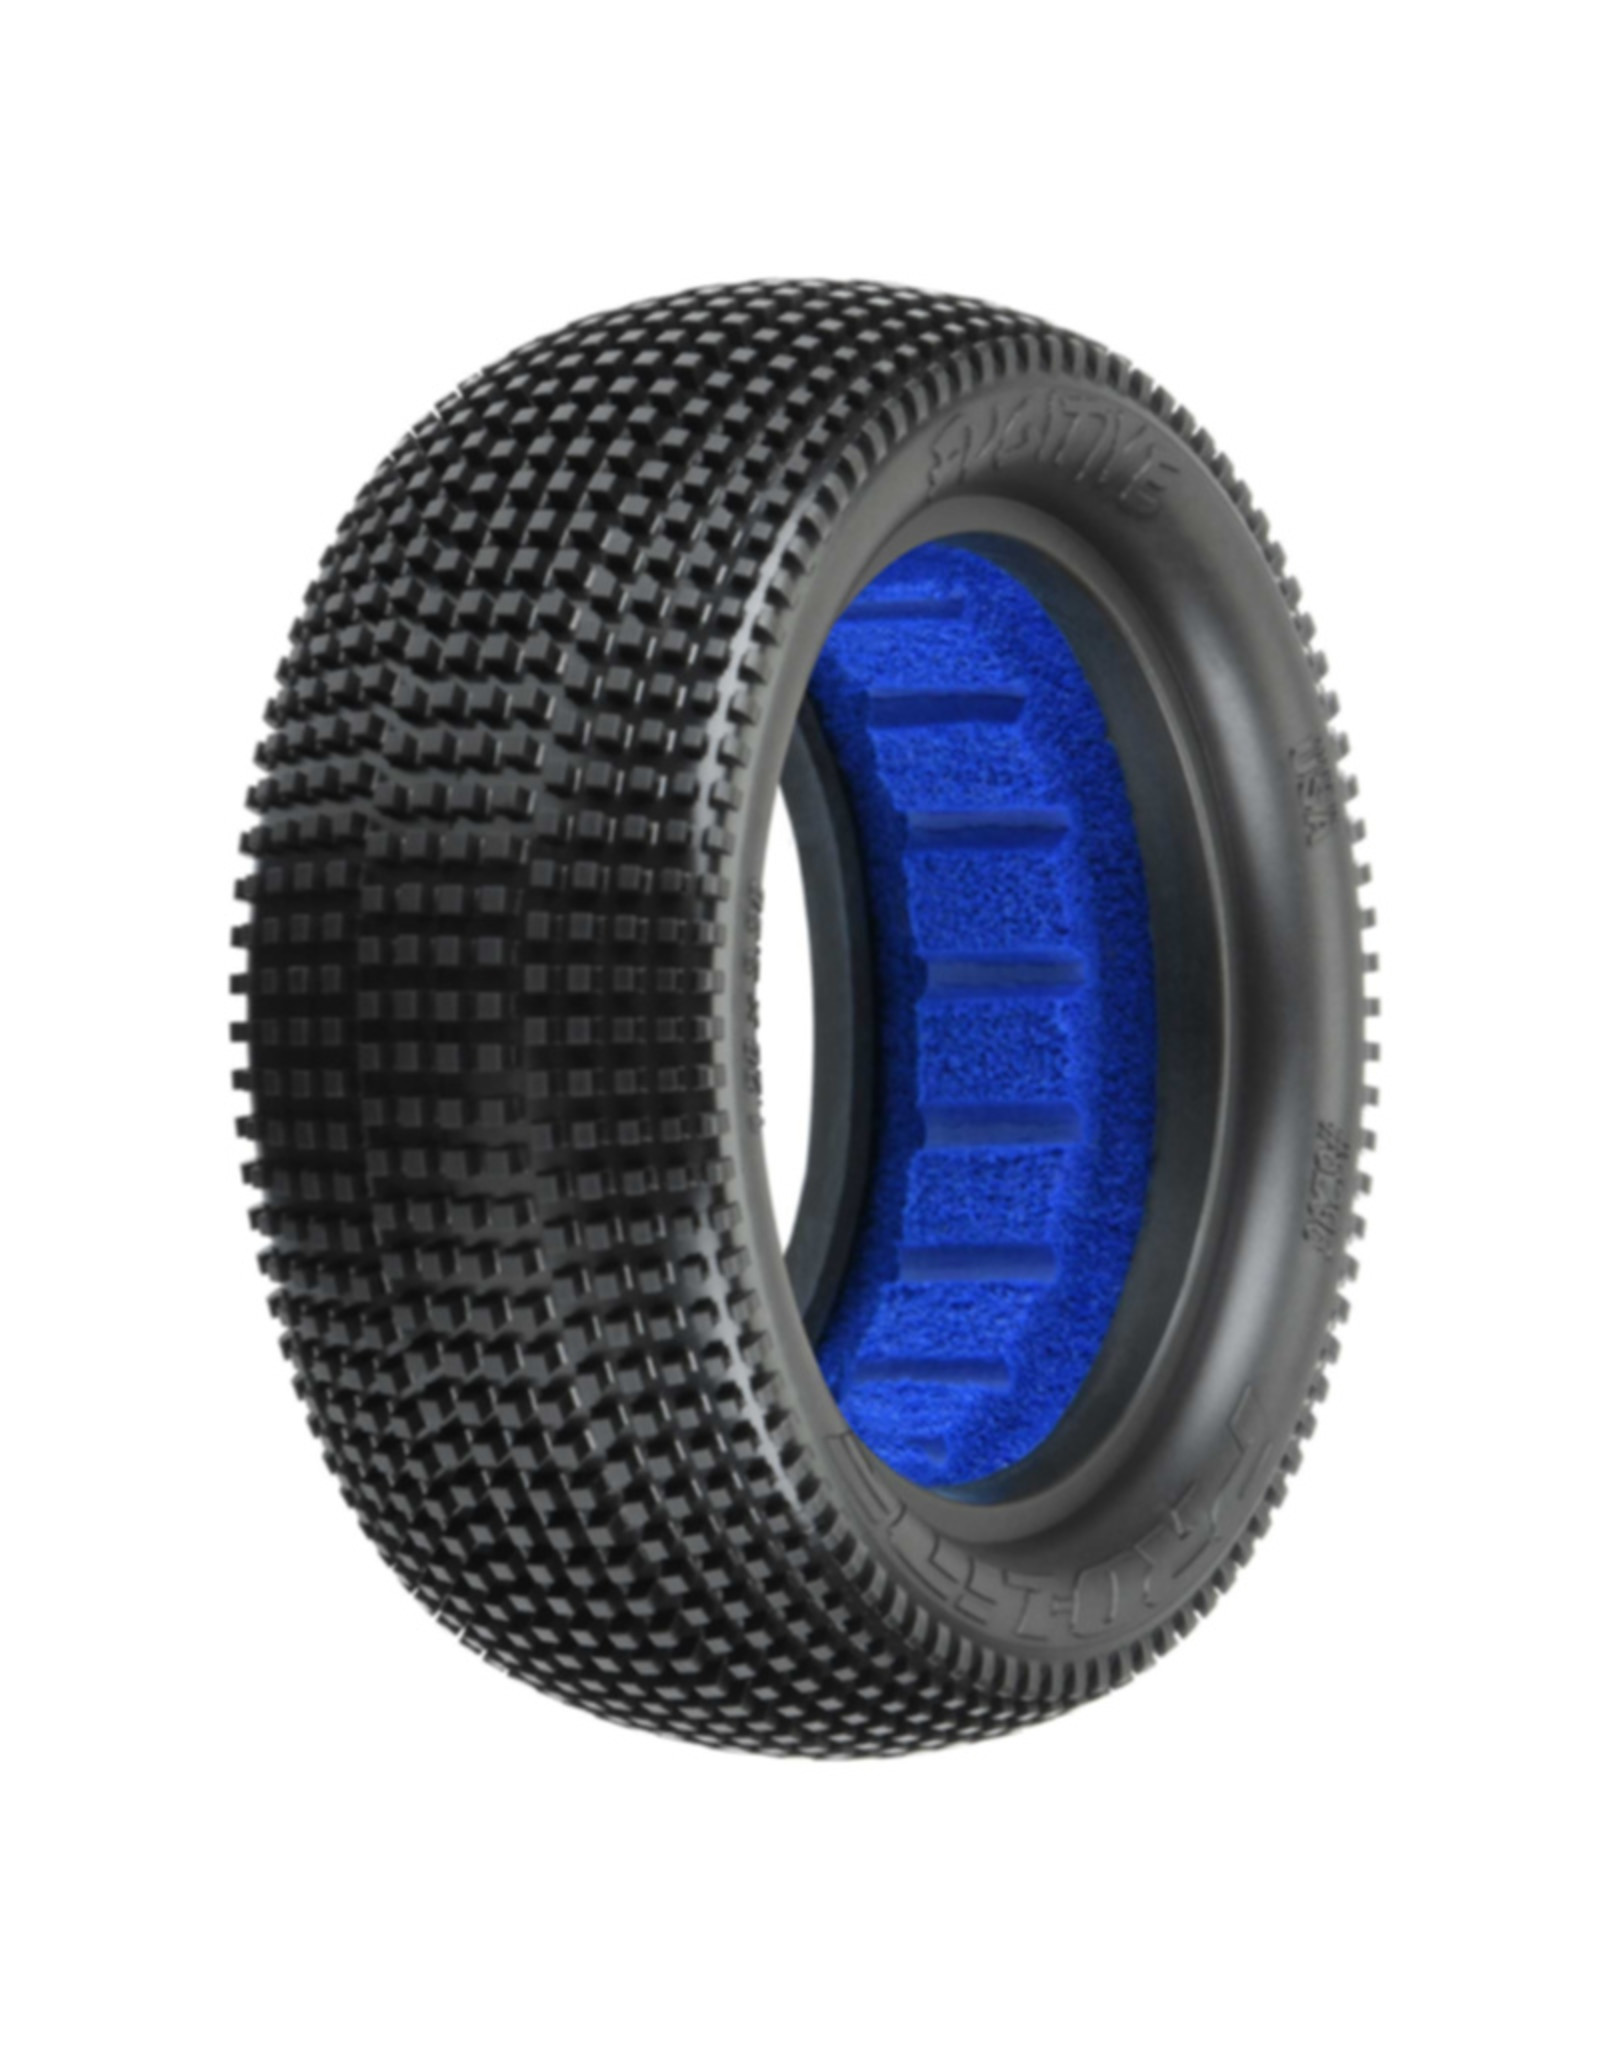 Pro-Line Racing PRO829603  Fugitive 2.2" 4WD M4 Buggy Front Tires (2)